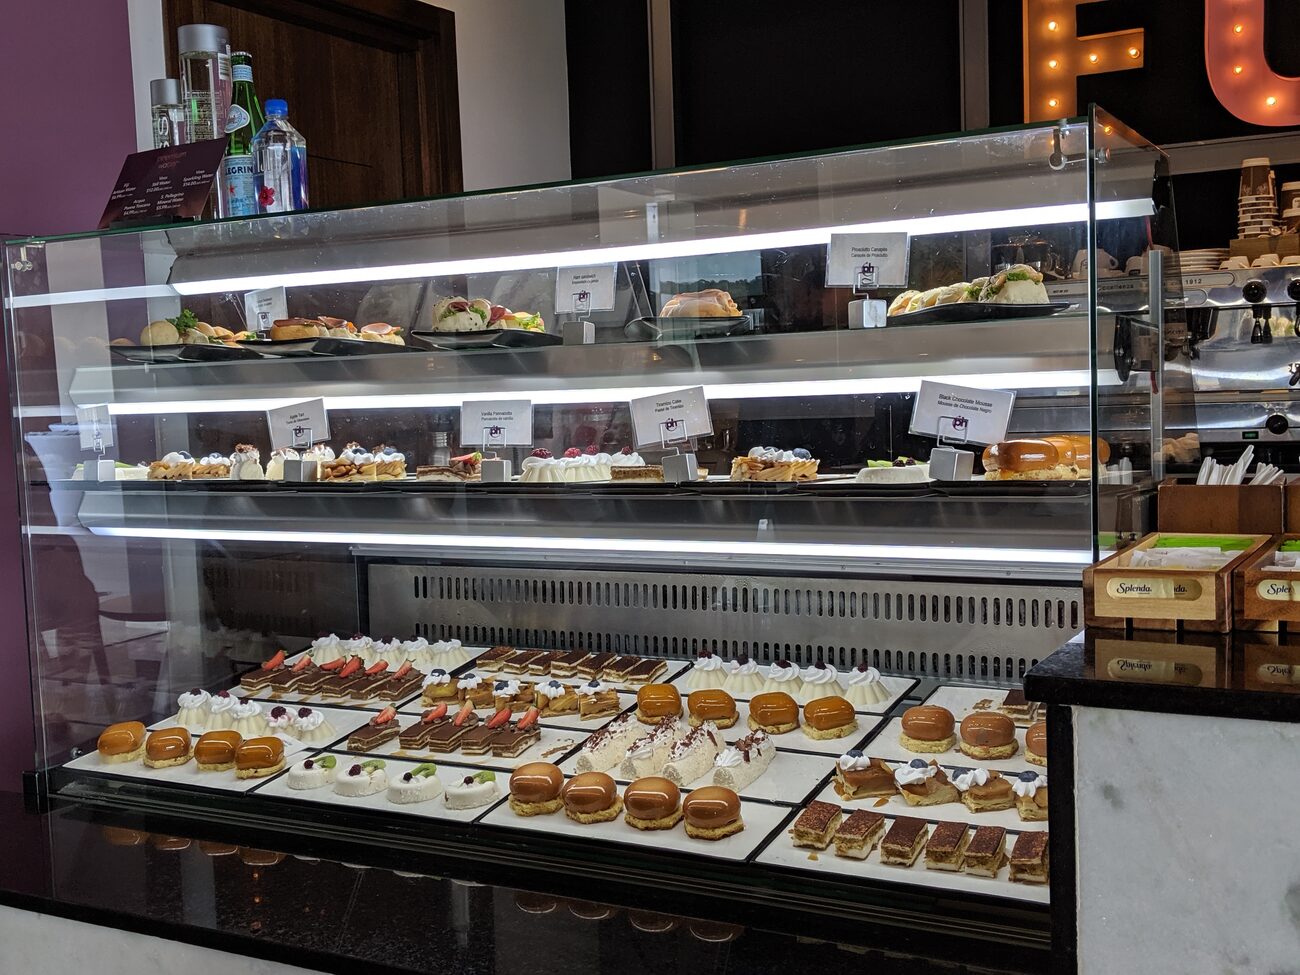 Display case of different pastries